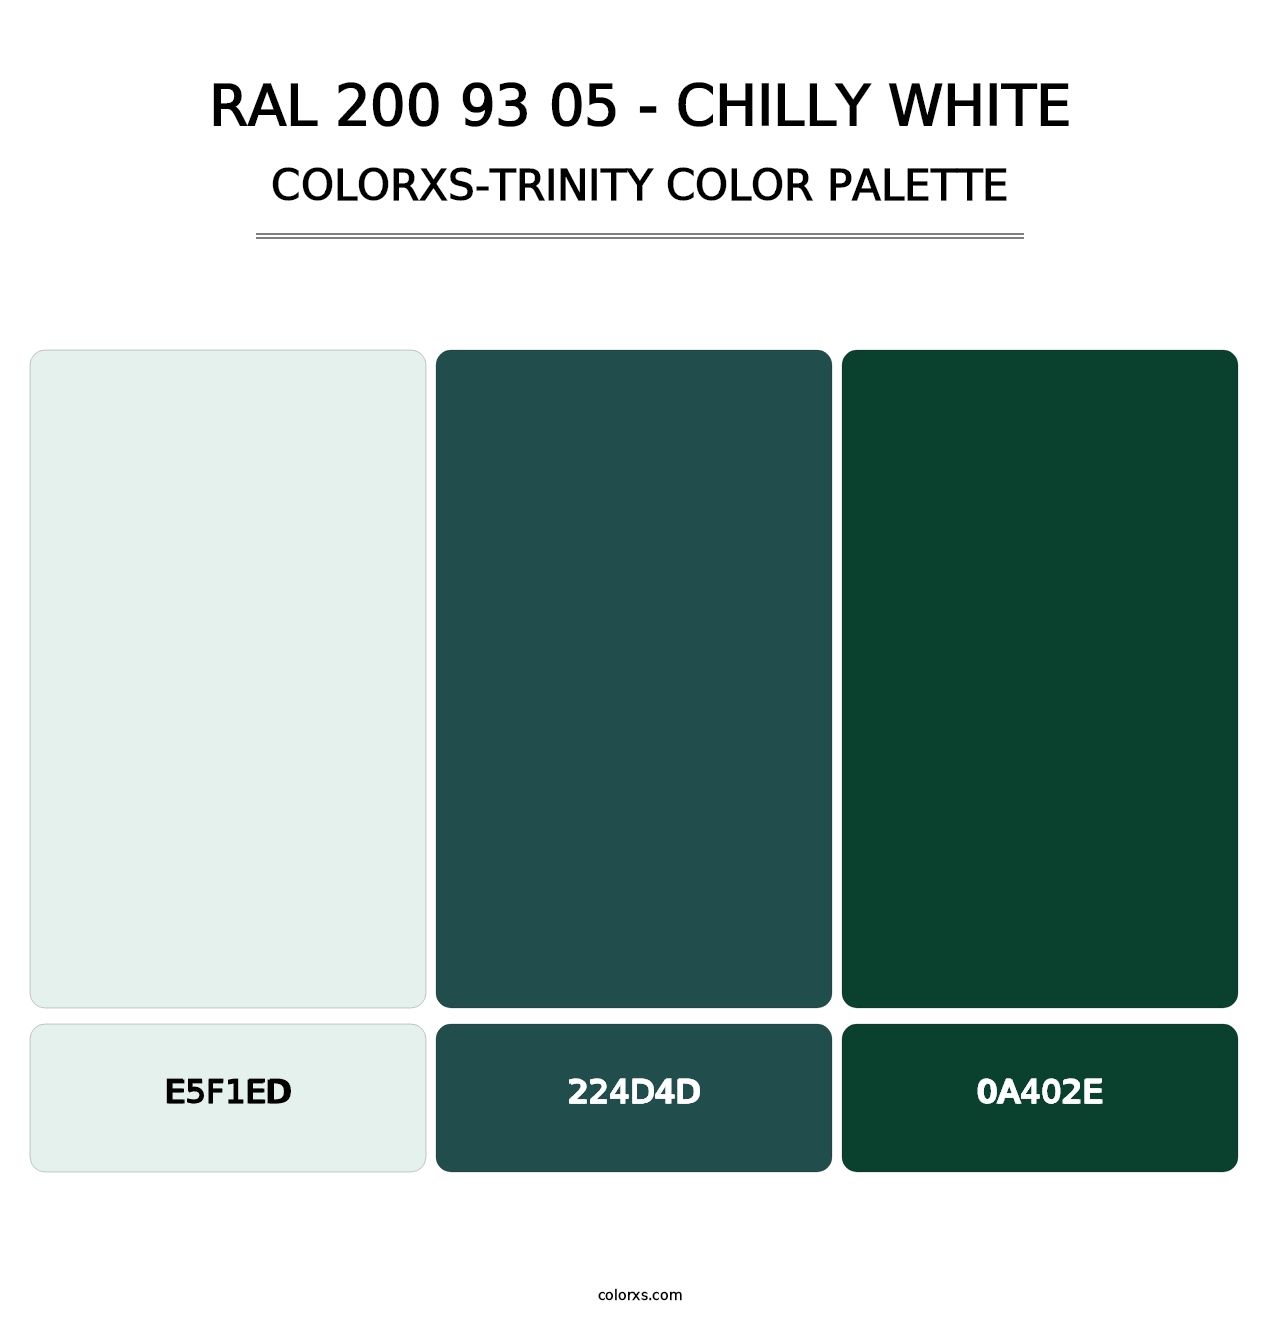 RAL 200 93 05 - Chilly White - Colorxs Trinity Palette